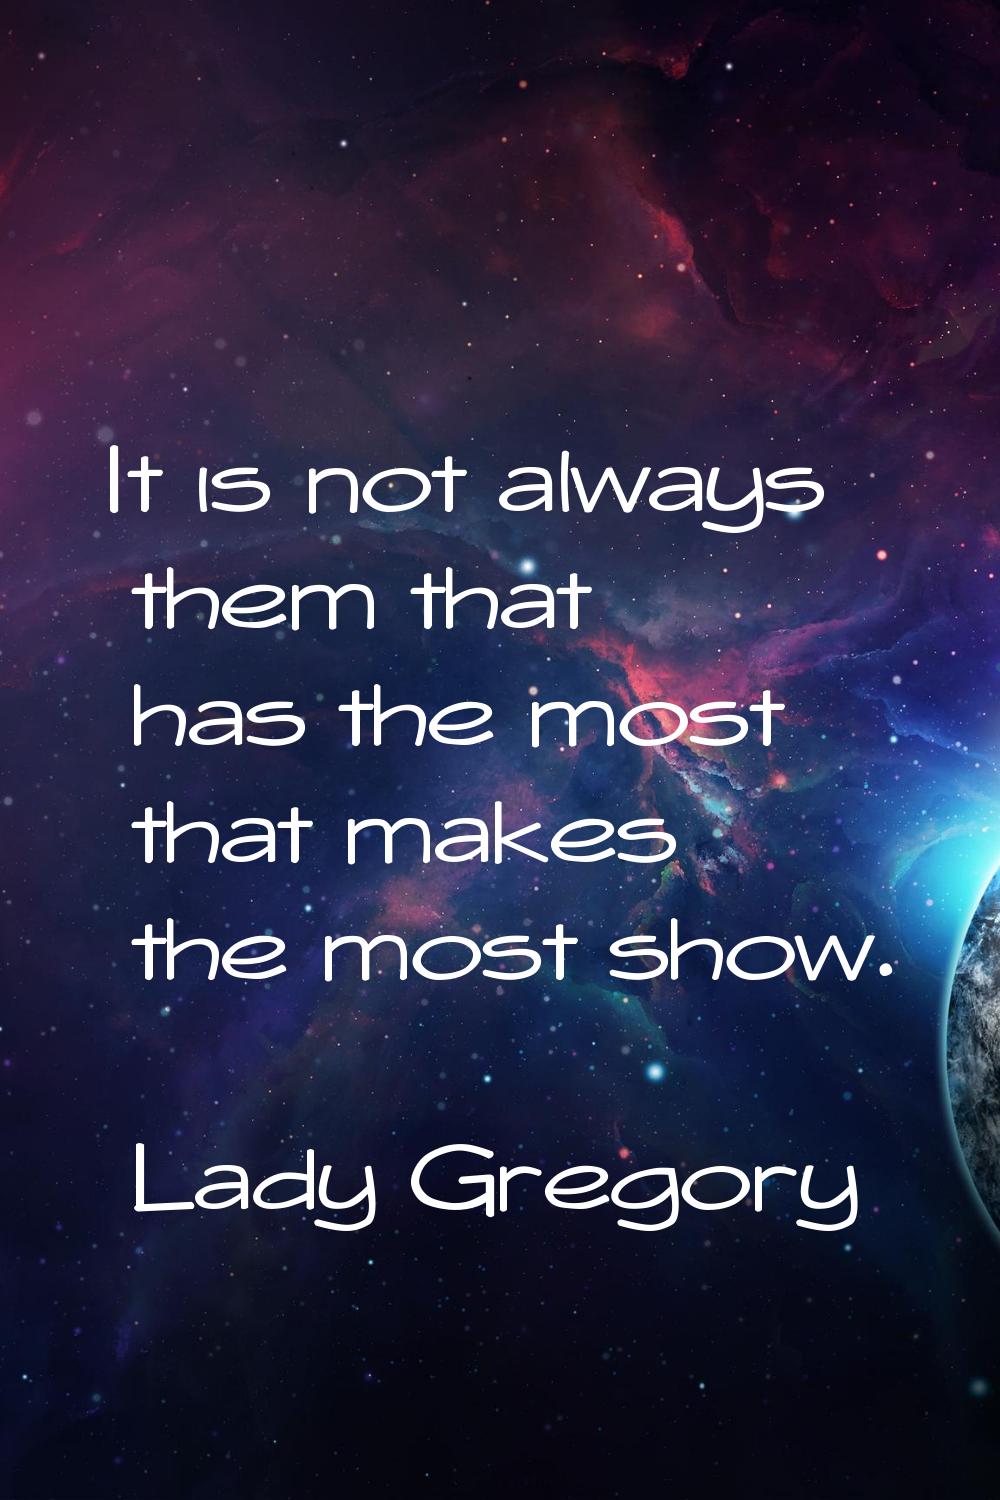 It is not always them that has the most that makes the most show.